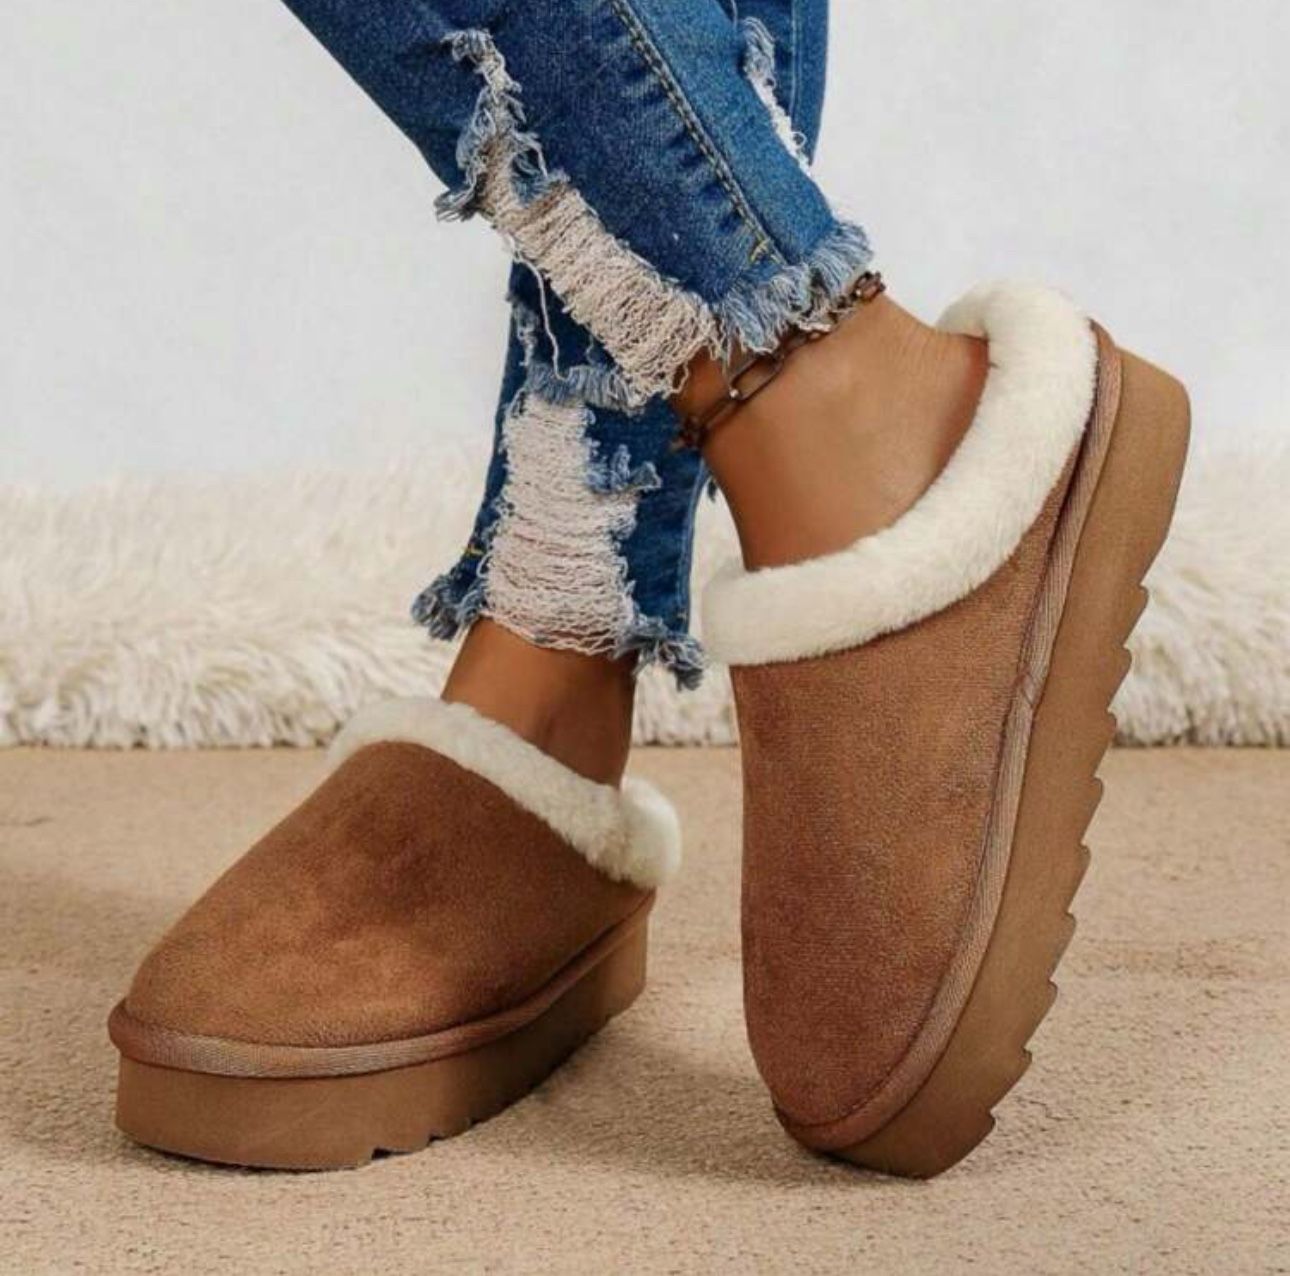 Women's Fuzzy Platform Slippers Warm Cozy Indoor Outdoor Faux Lined Clog Slippers